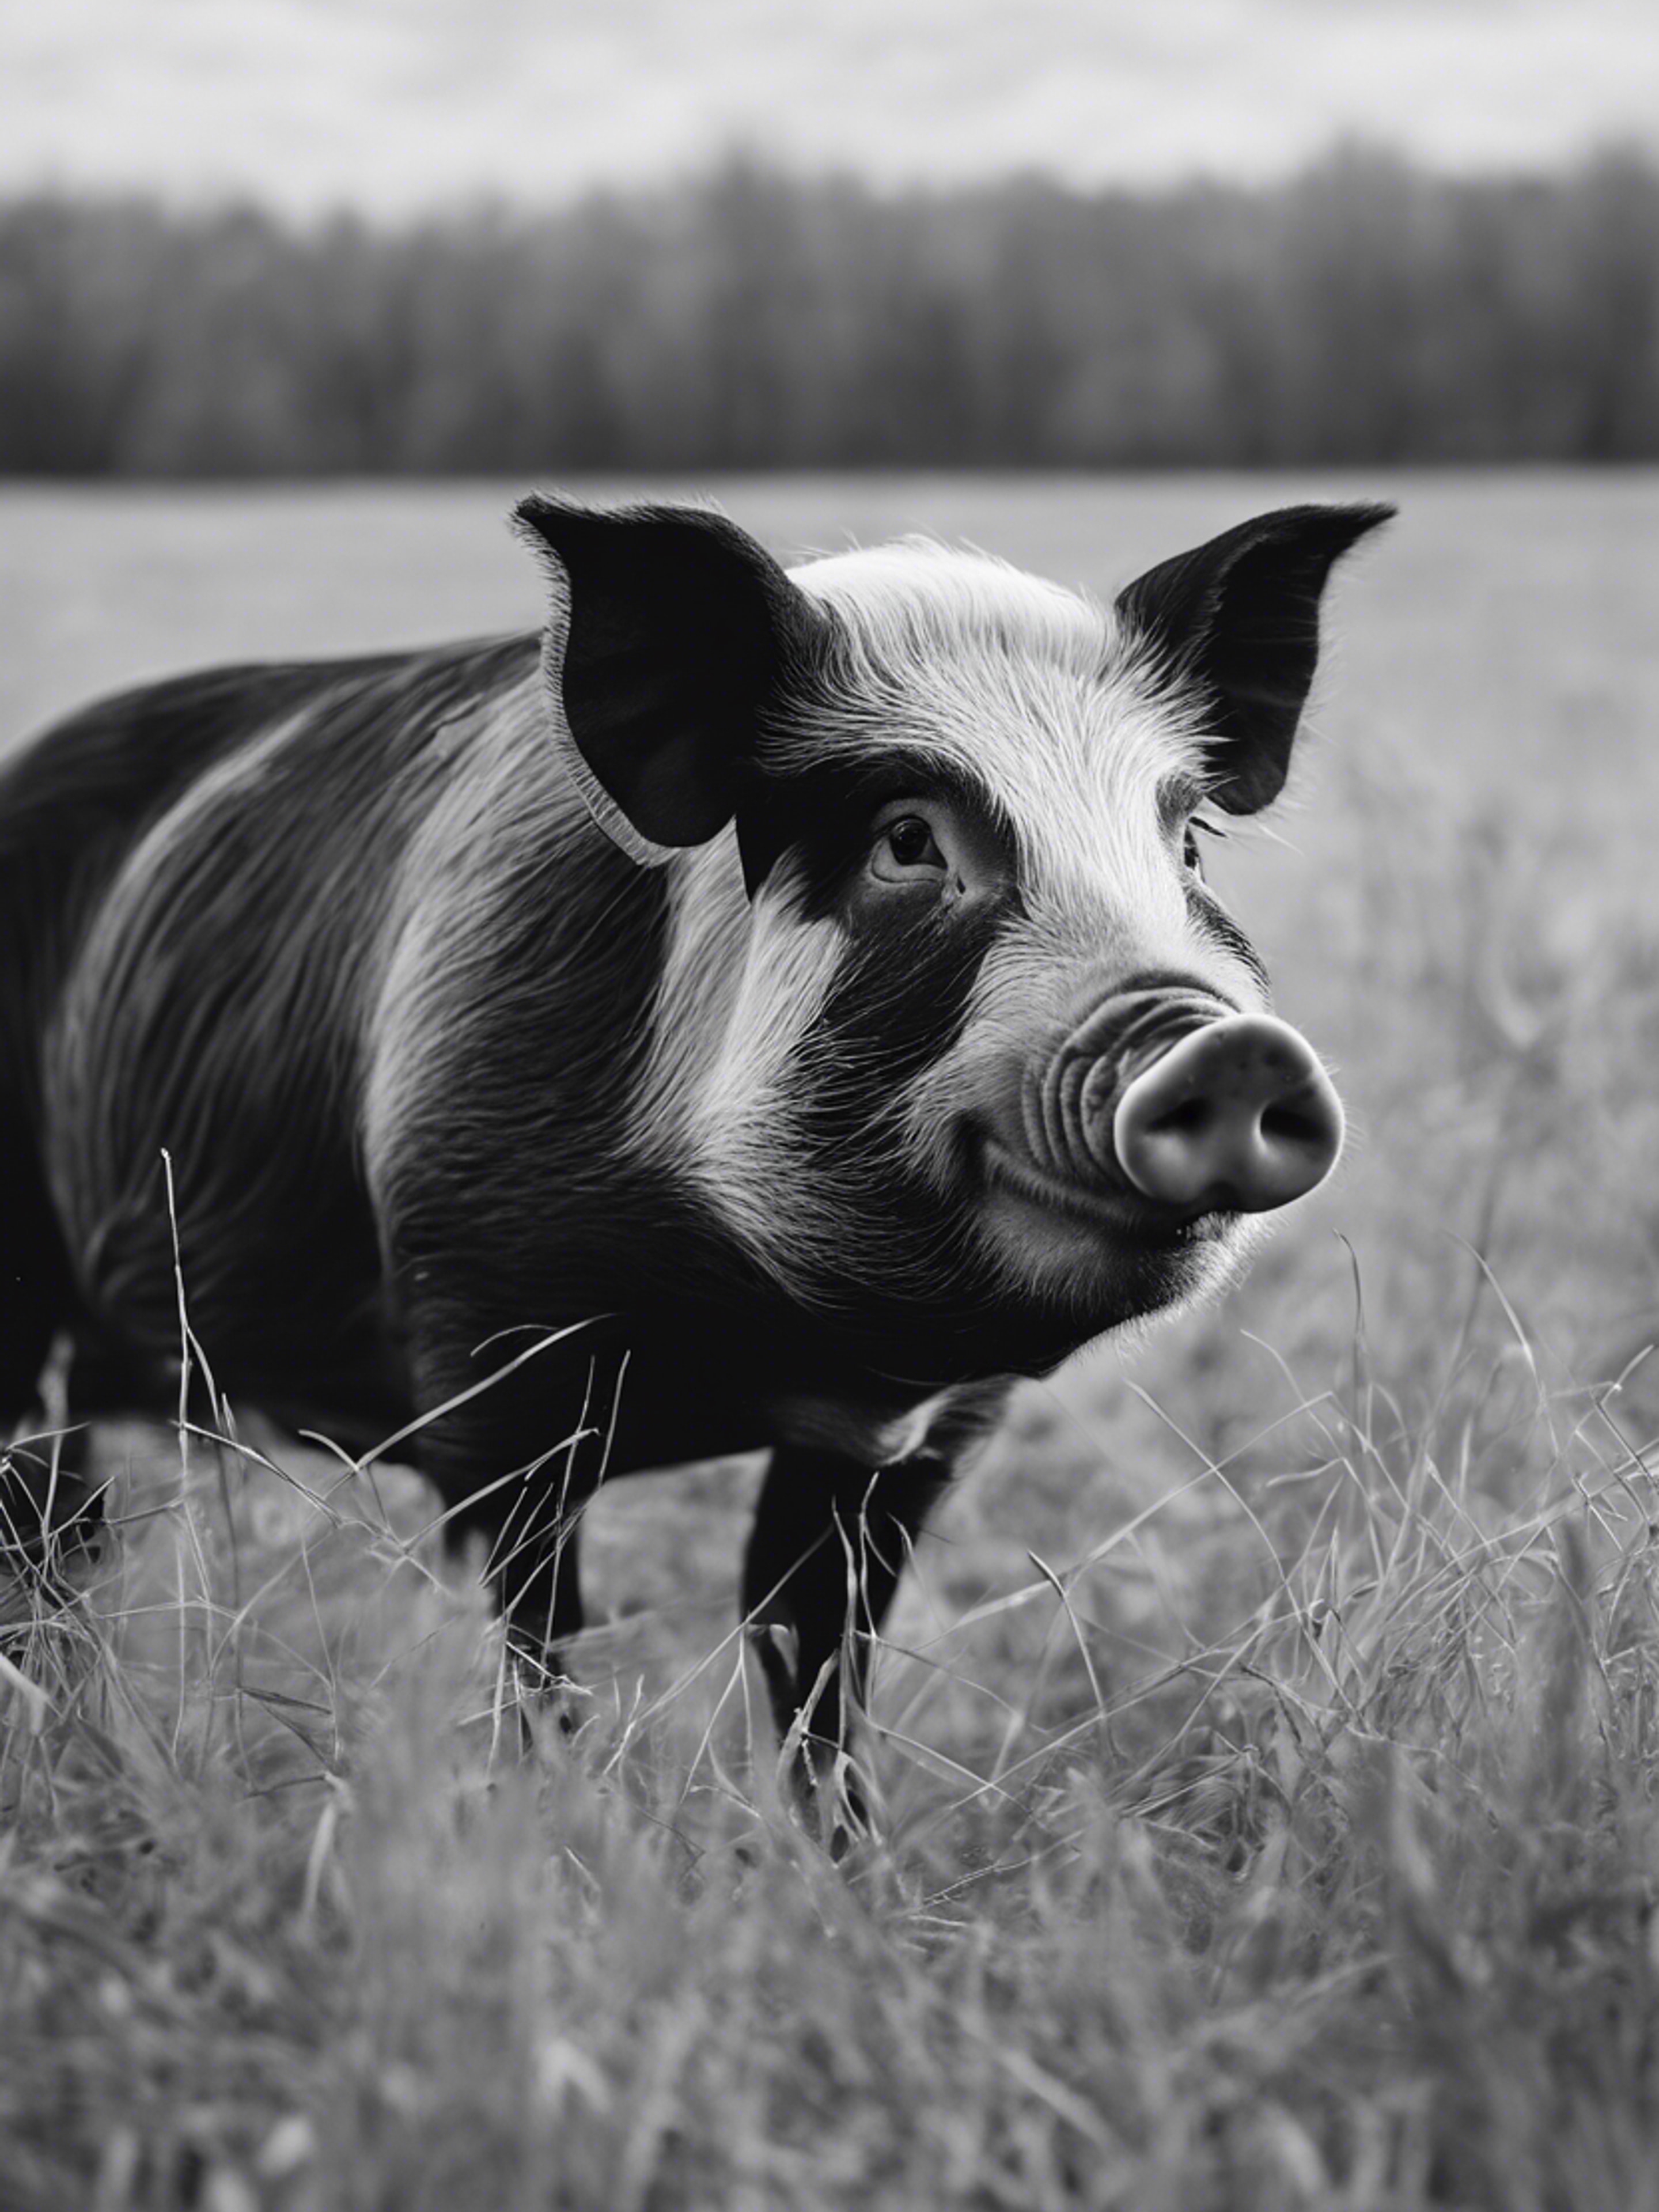 A black and white pig with clean fur, captured in a country meadow during tranquility of winter. Tapeta[700eb497dc0e43a8b530]